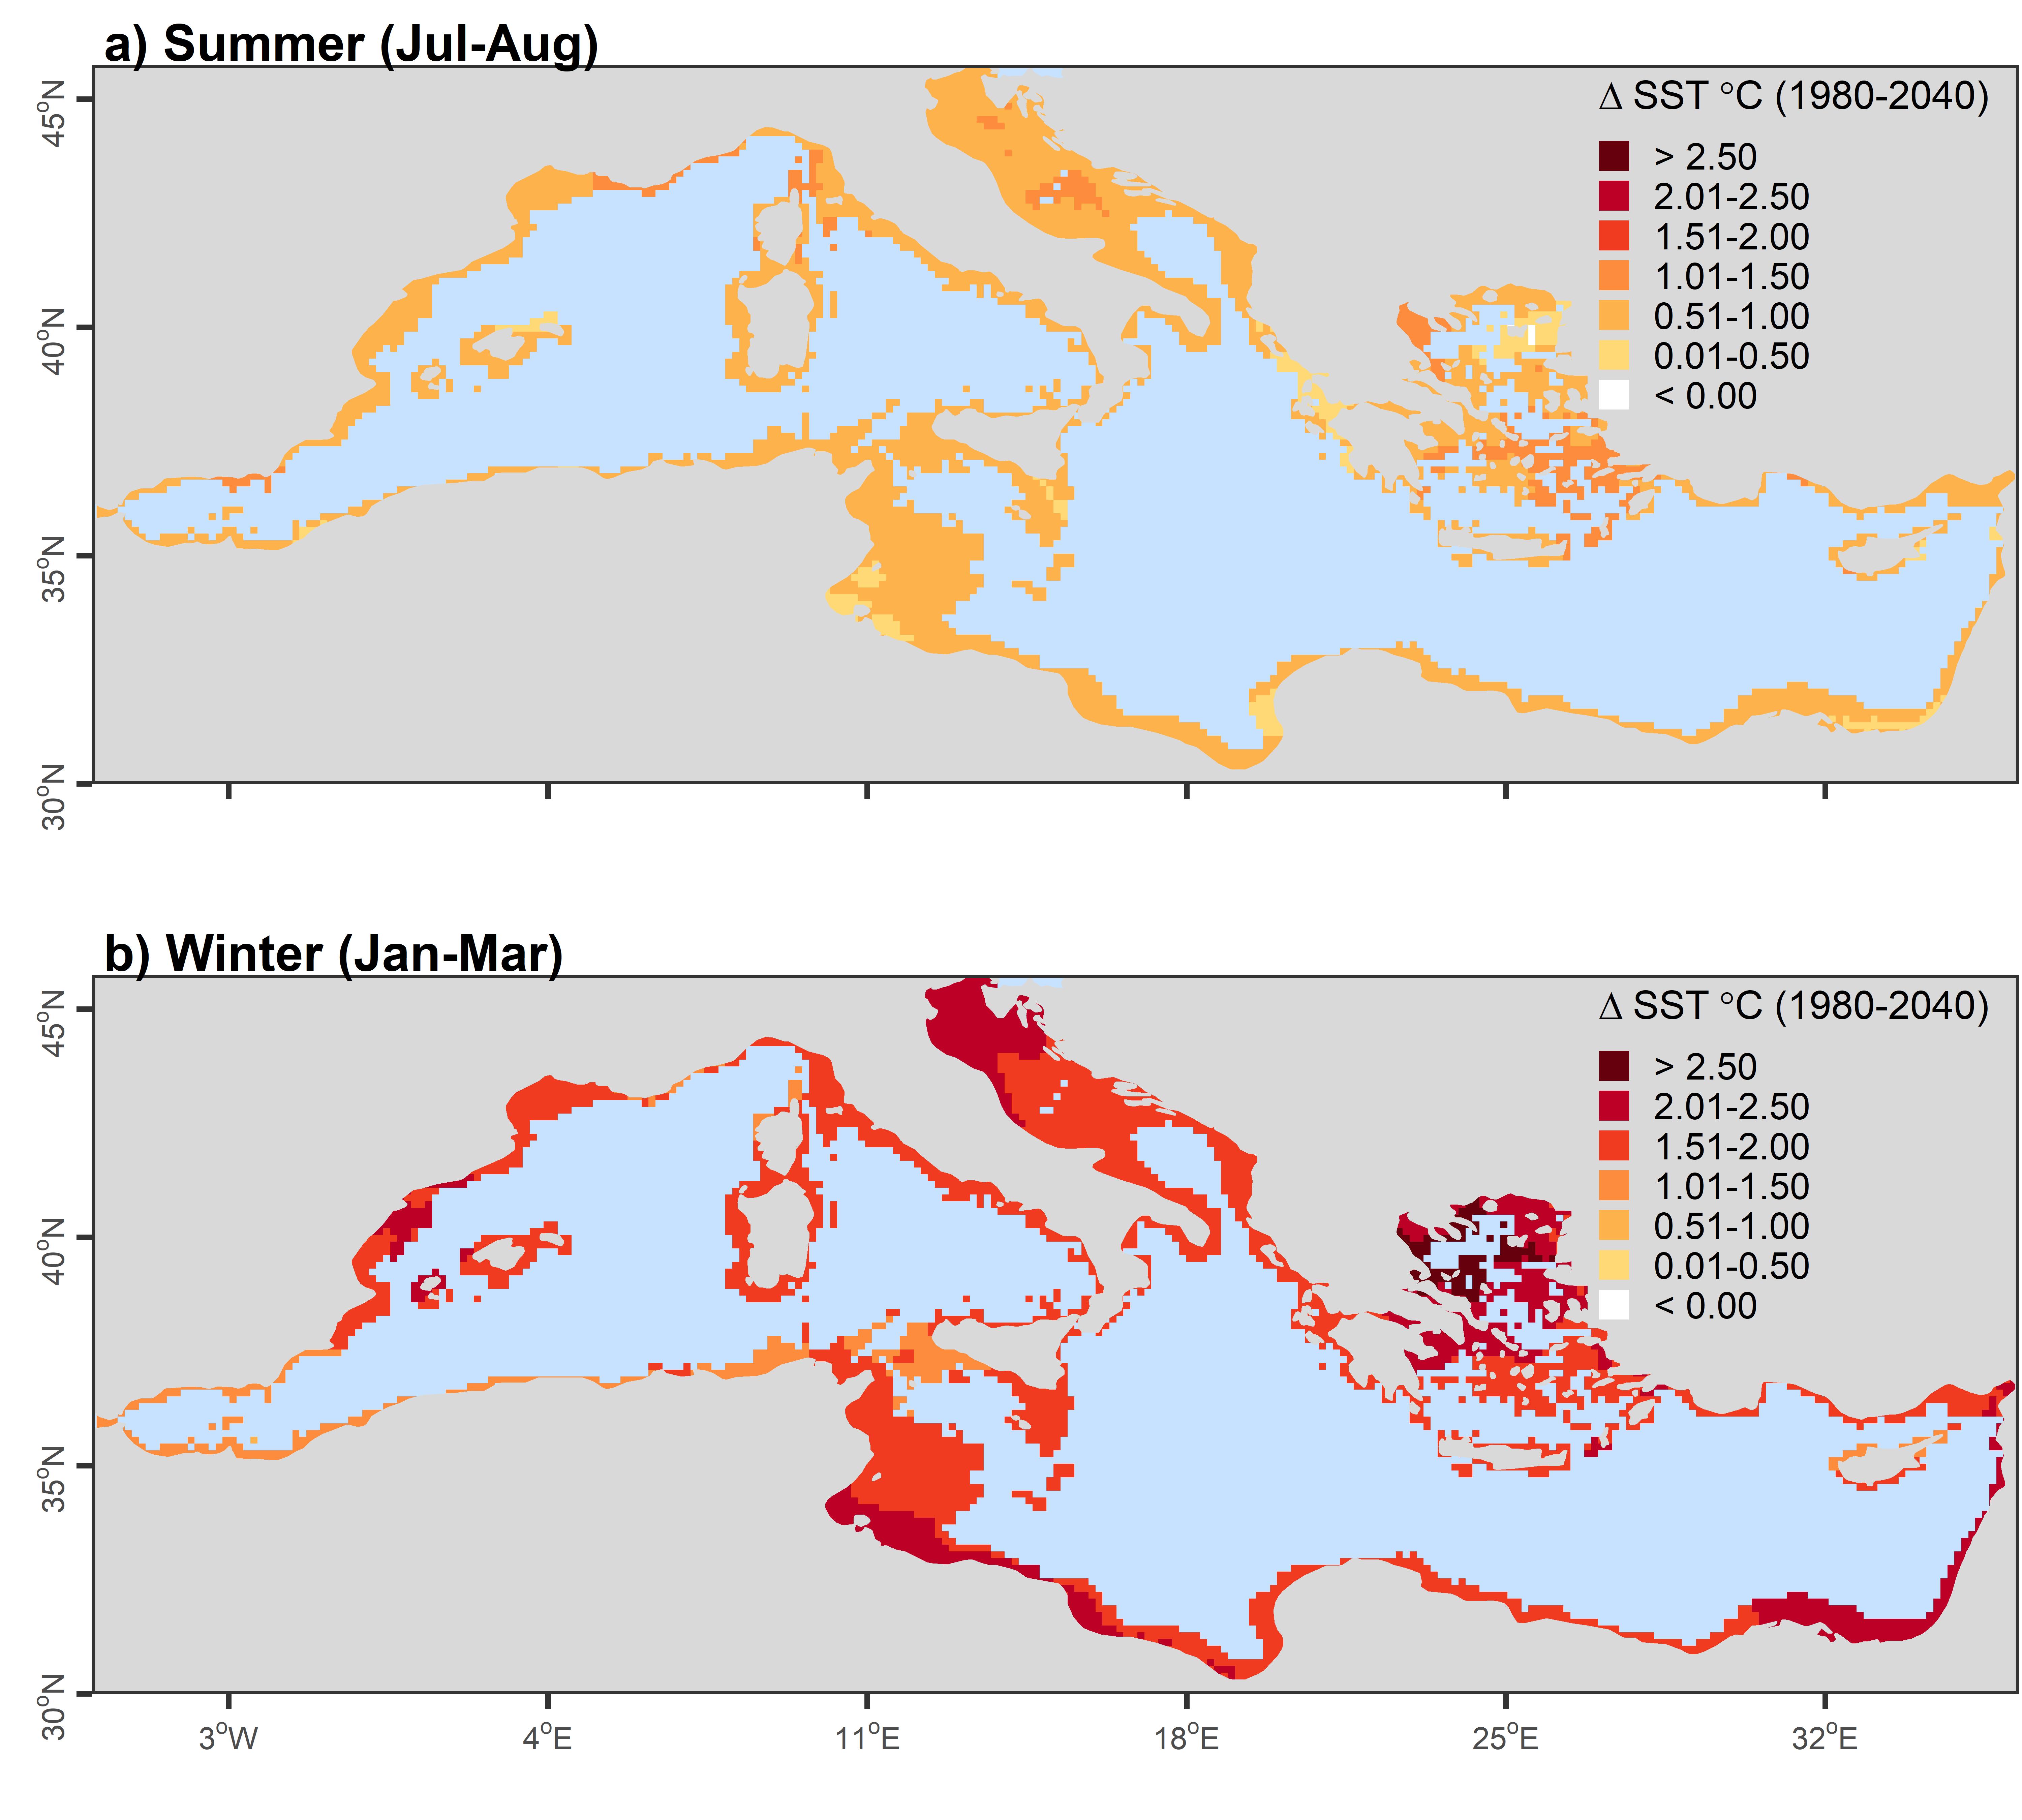 The Mediterranean Sea is wqrming during winter at twice the rate of summer warming. The Spatial Epidemiology Lab (SpatialEpi) is a medical geography and disease ecology research group based at the University of Queensland that has applied multivariate models to understand how this warming is influencing fish biodiversity.